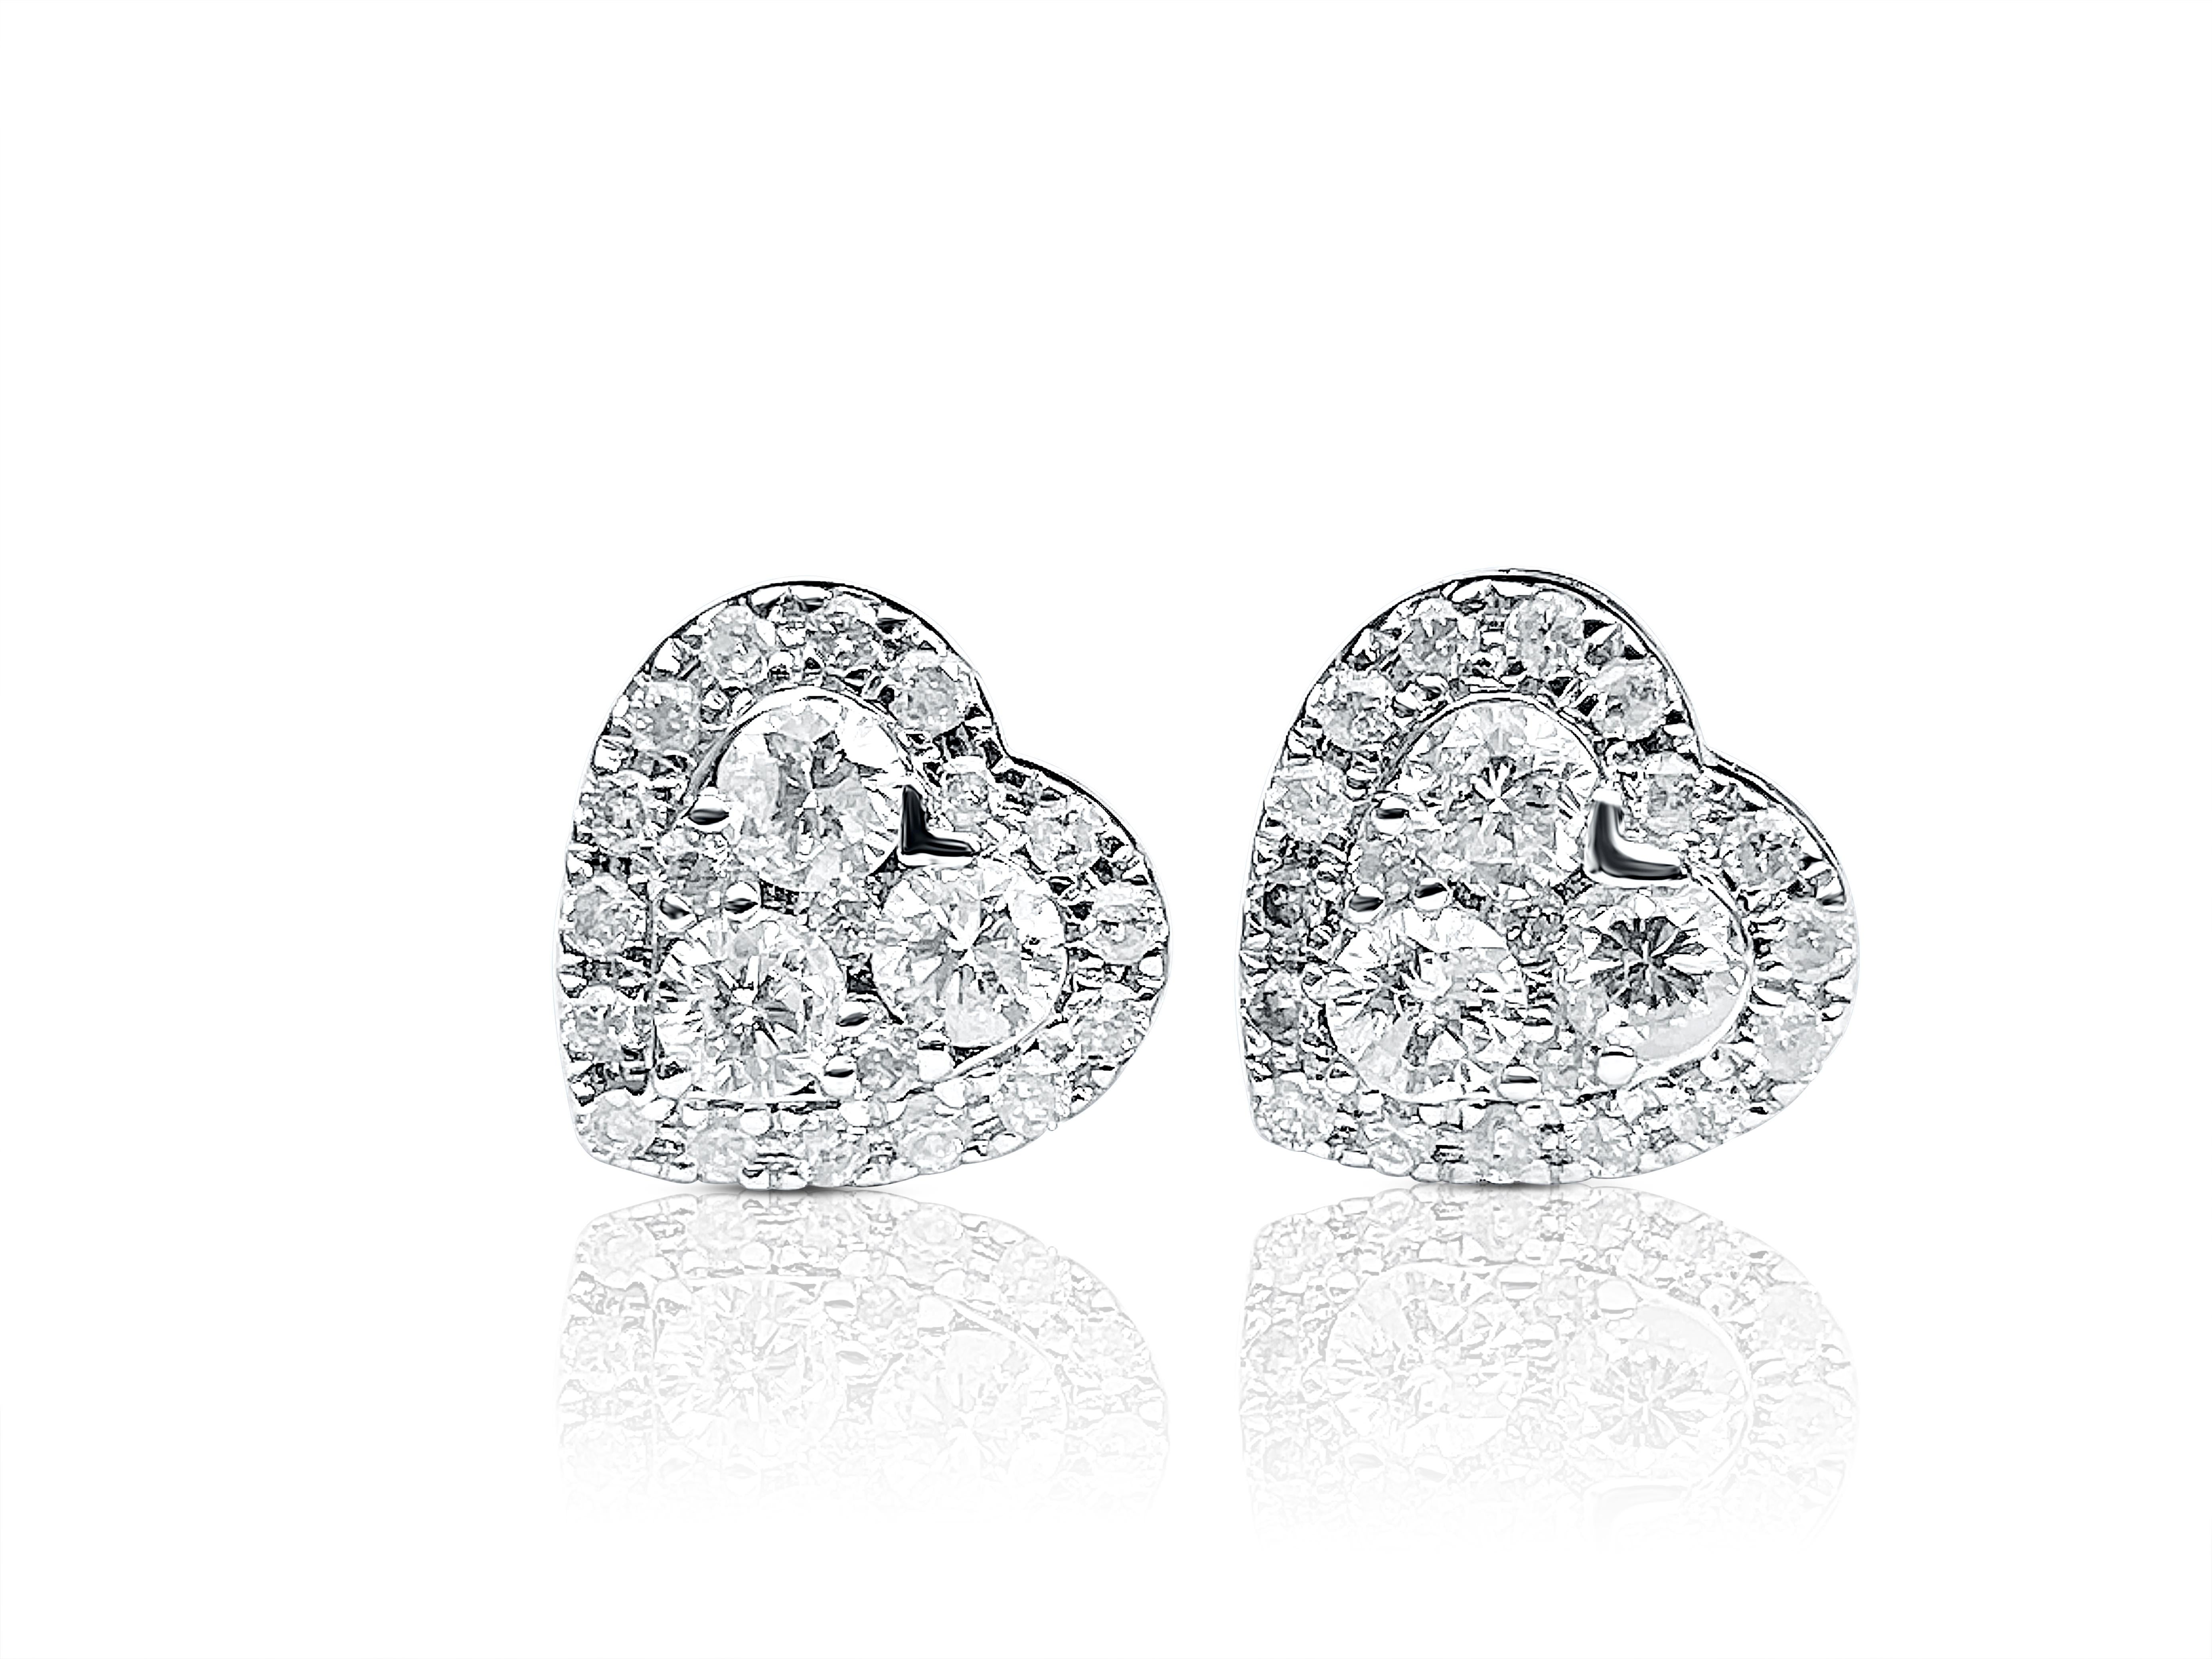 Set in 18K White Gold and adorned by a whopping 44 Round-Brilliant Cut White Diamonds, these lovely earrings are designed in a heart motif and are set with the symbol of eternal love– white diamonds.

Details:
✔ Stone: Diamond
✔ Diamond Weight: 1.15